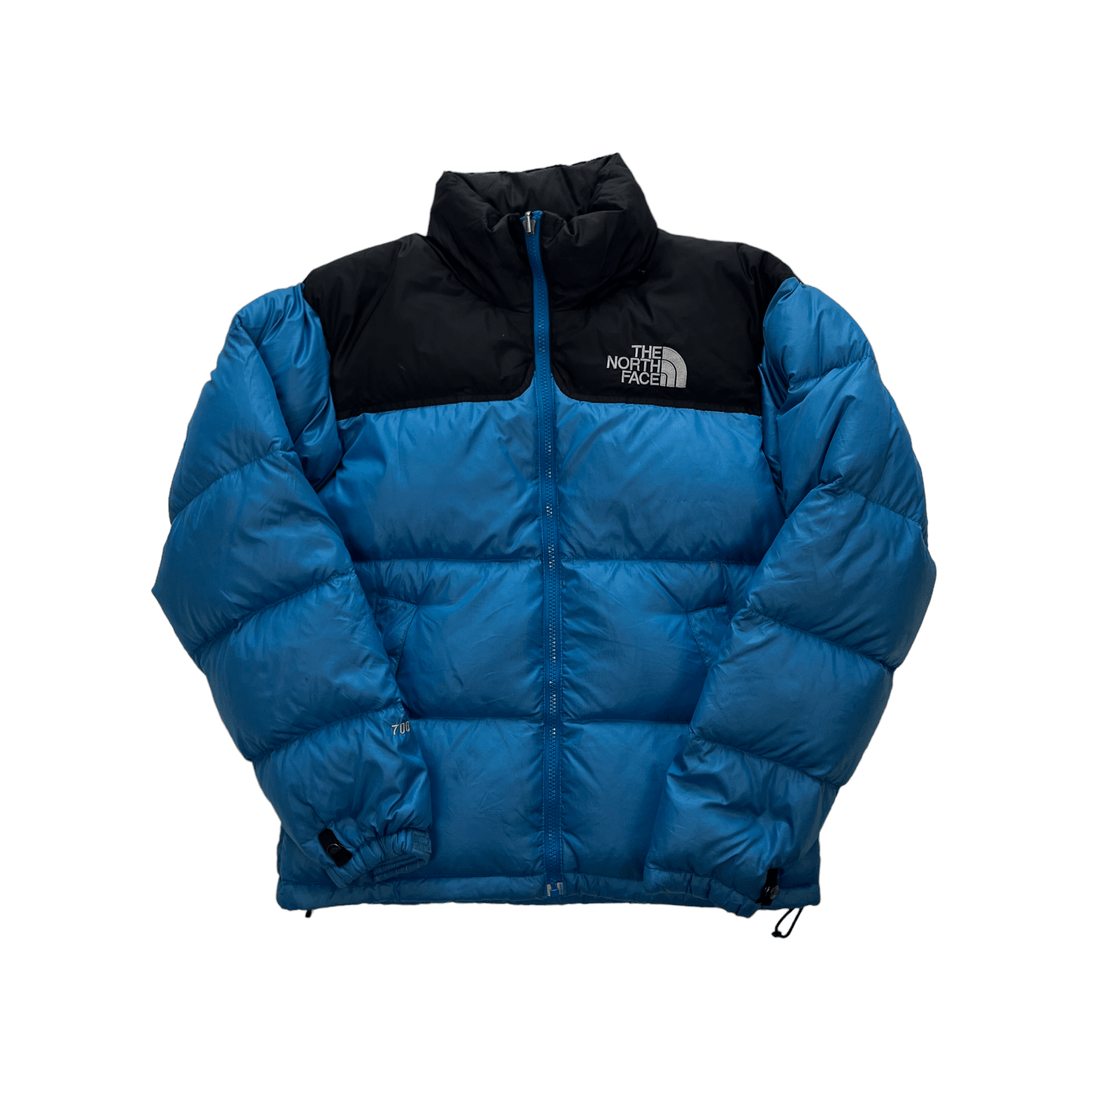 Vintage Blue + Black The North Face (TNF) Puffer Coat - Small - The Streetwear Studio